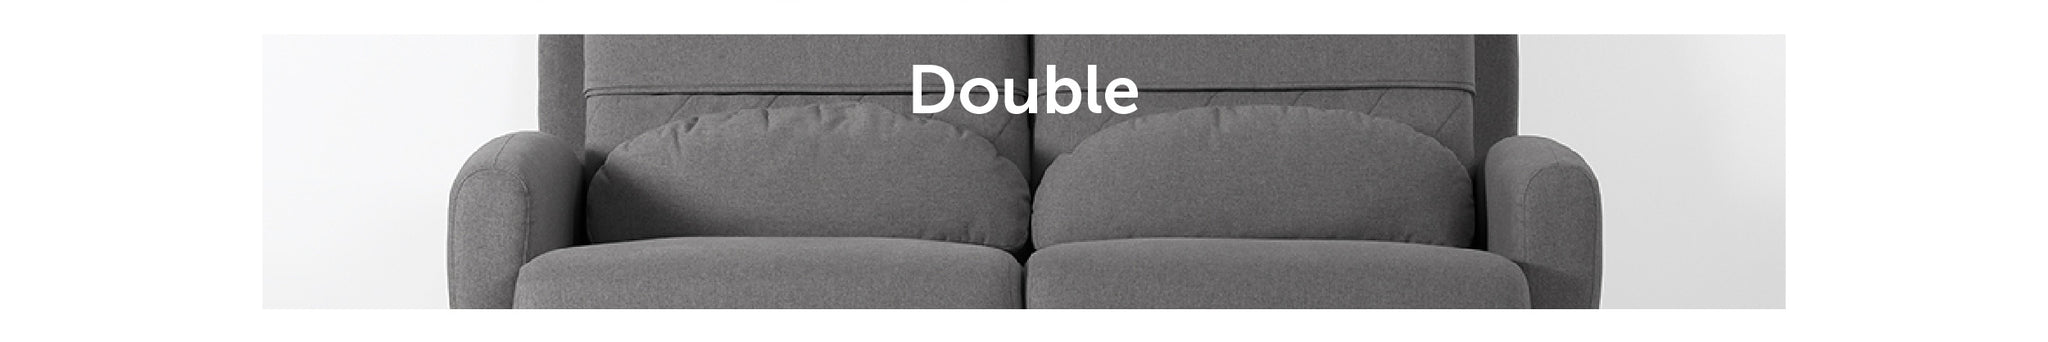 Turtleneck Sofa Double from Playful Angles Furniture by Ziinlife